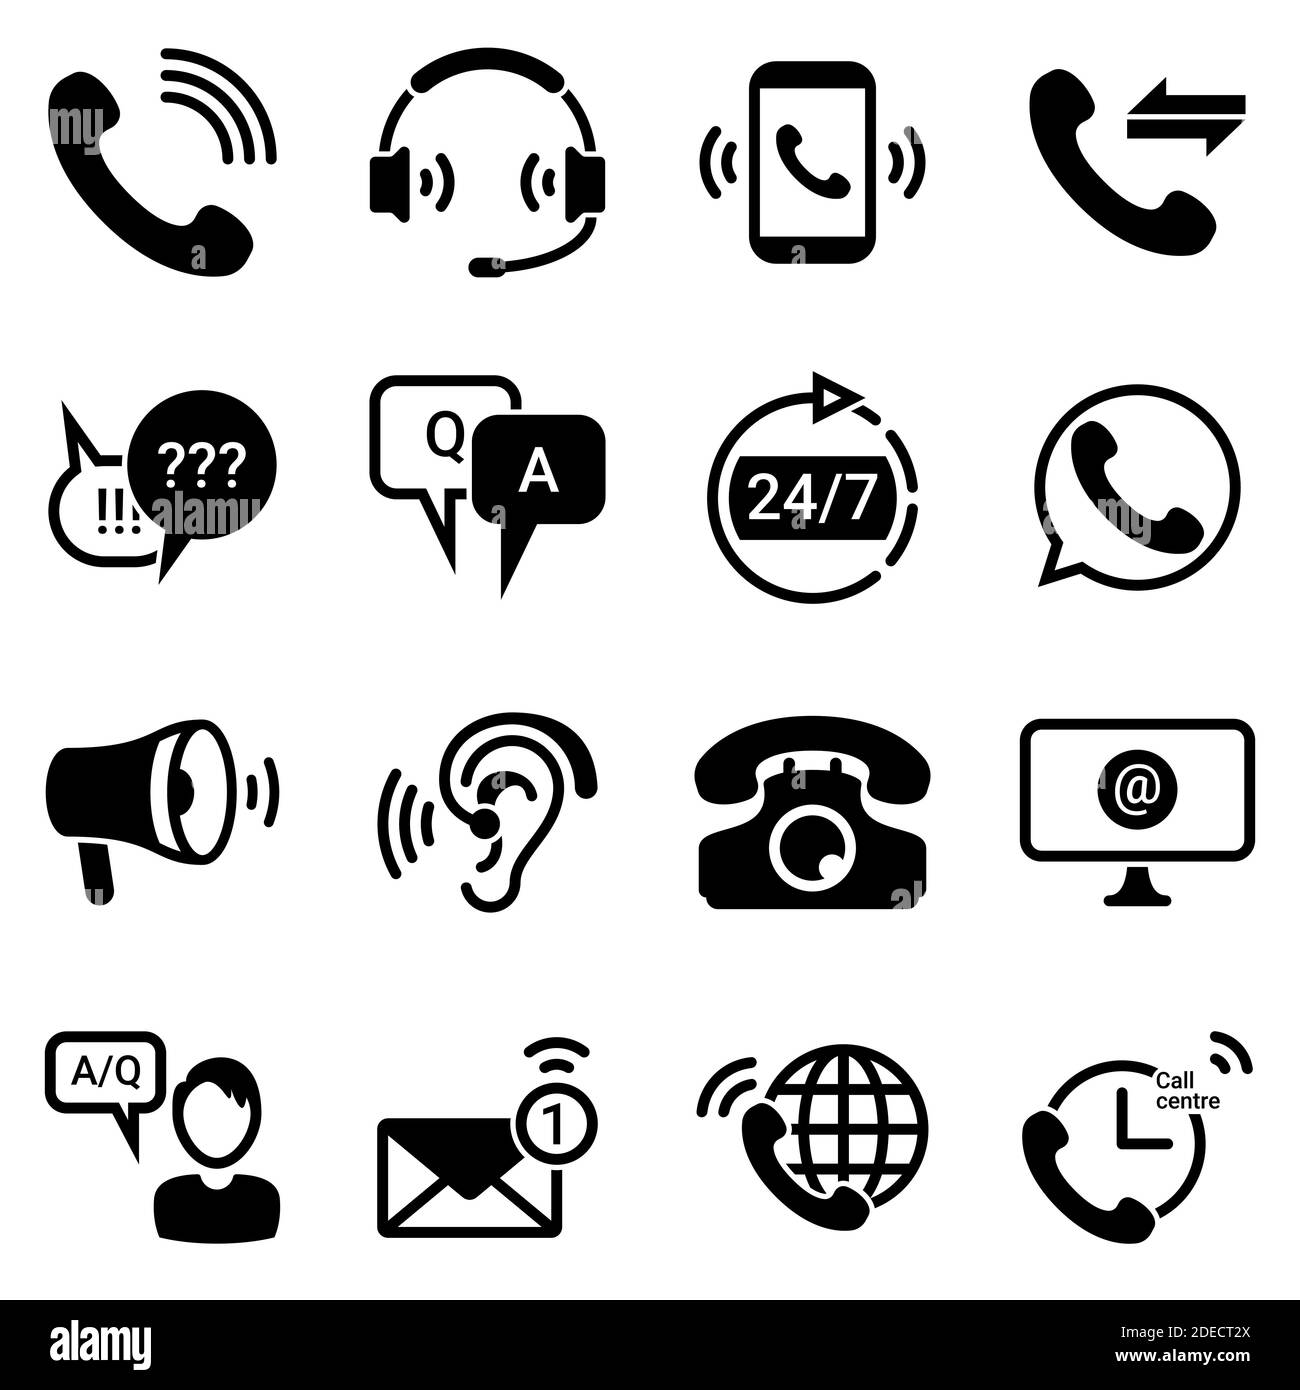 Set of simple icons on a theme Technical support, service, questions, answers, communication, office, internet, marketing, advertising, vector, set. B Stock Vector